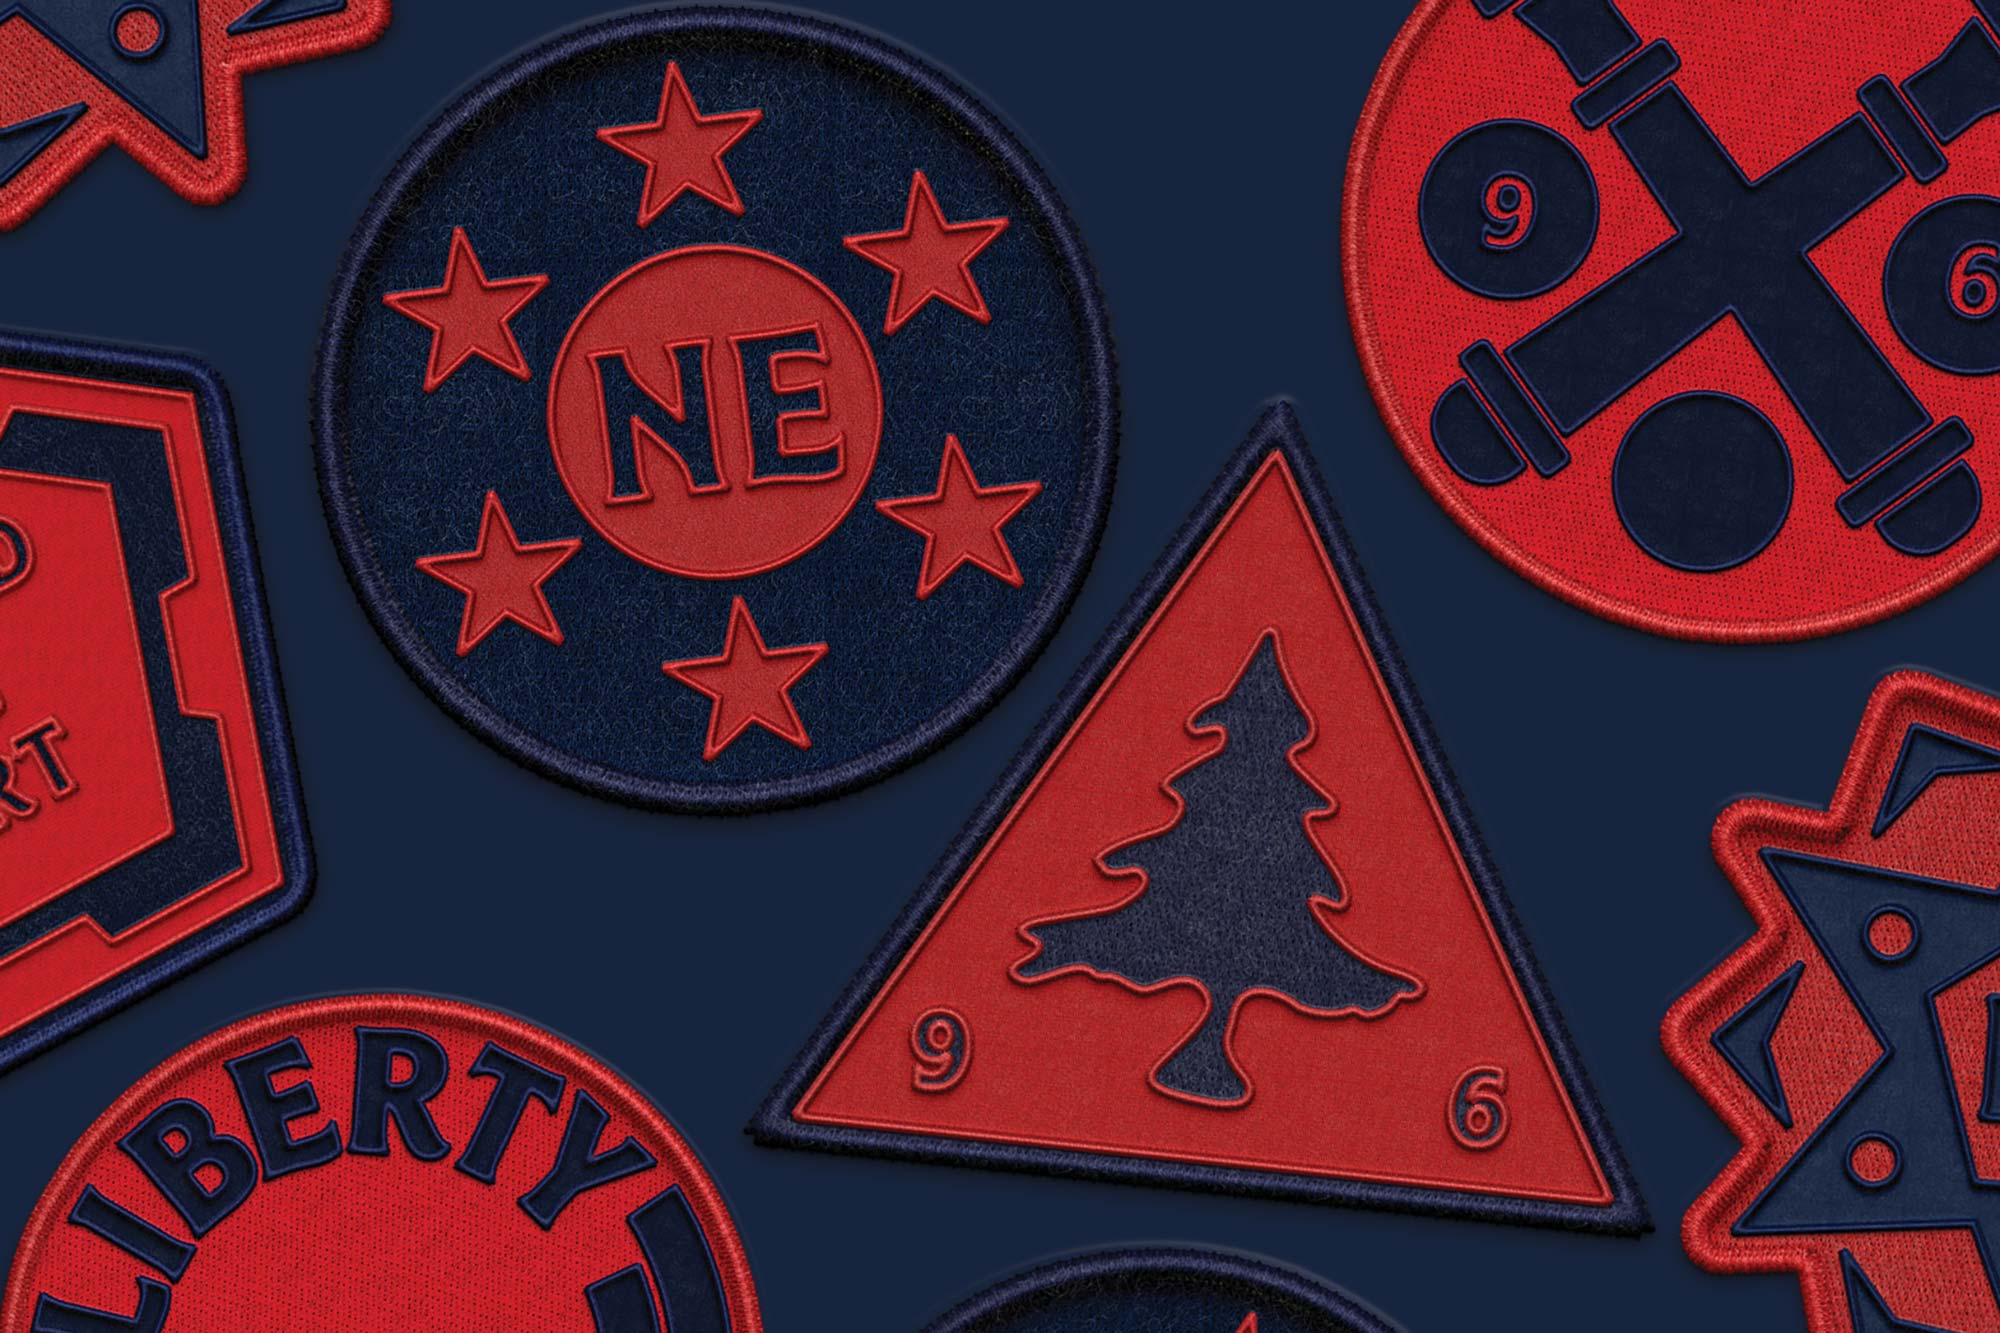 jkr new england patches